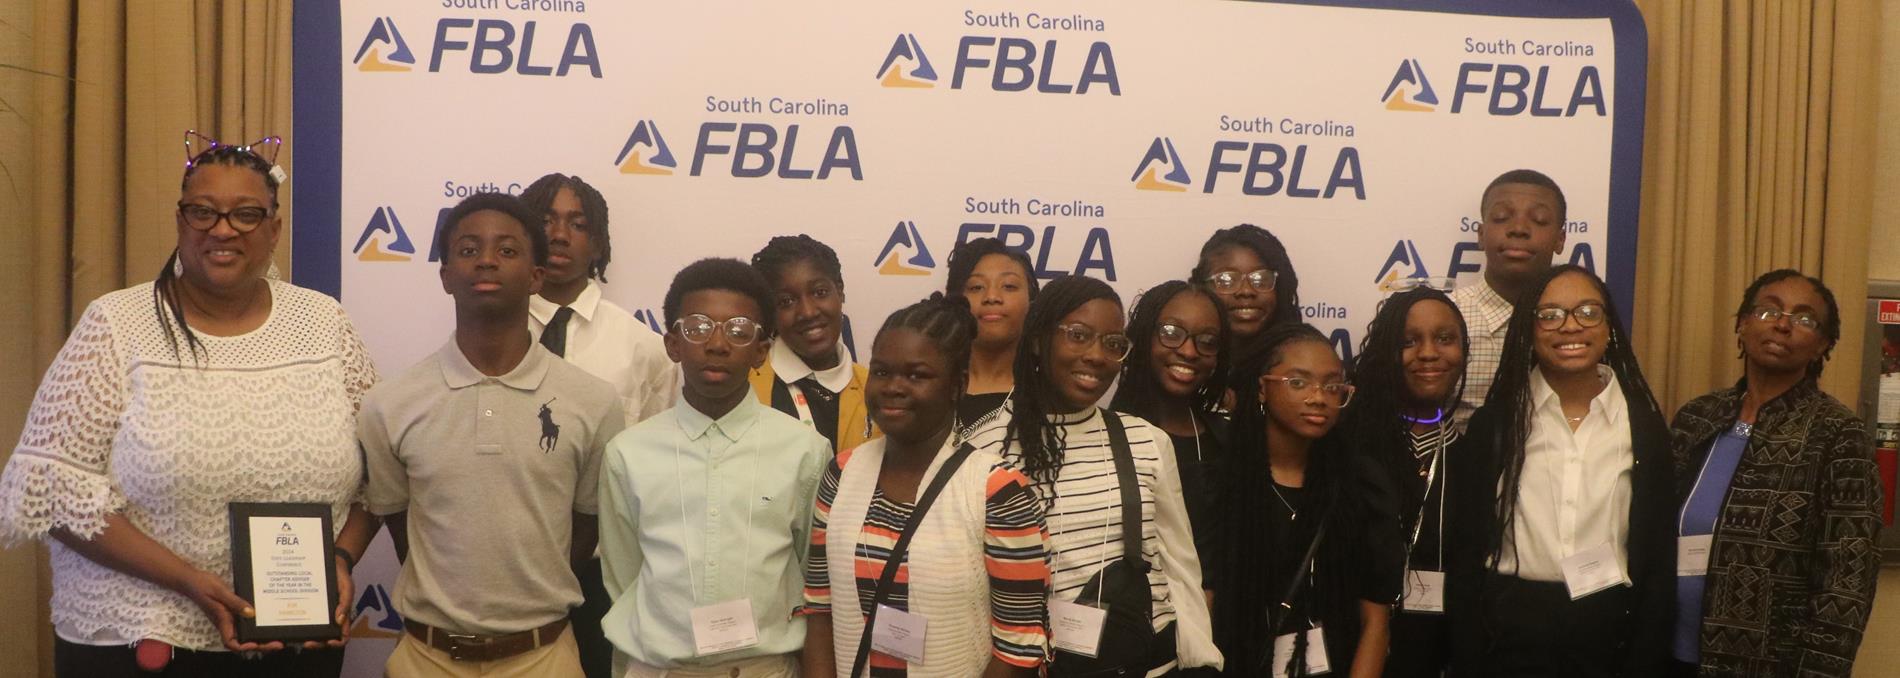 South Carolina FBLA. Picture of students along with two teachers at FBLA conference 